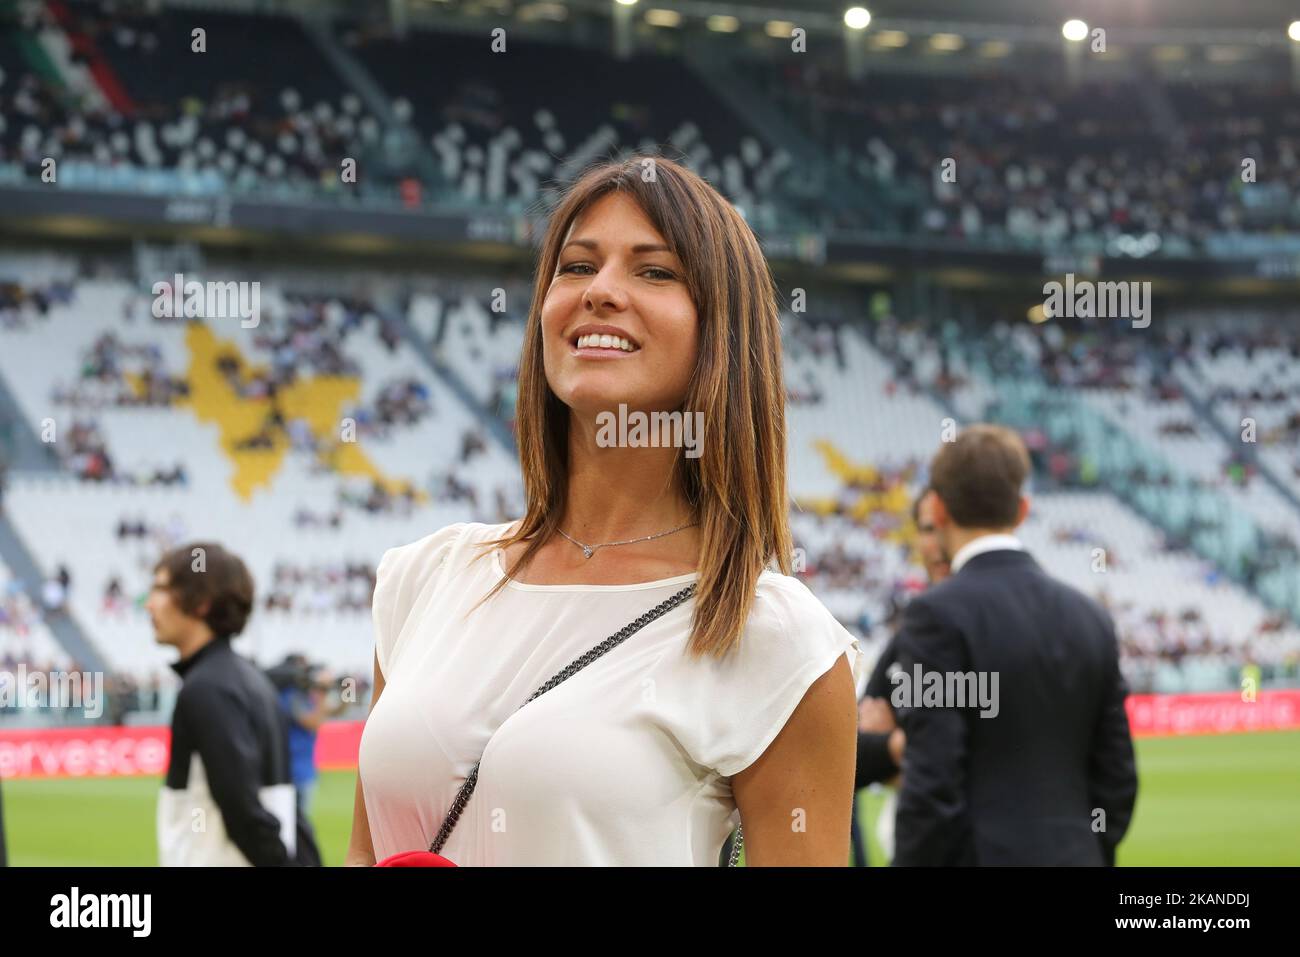 barbara-pedrotti-attends-the-twenty-sixth-partita-del-cuore-charity-football-game-at-juventus-stadium-on-may-30-2017-in-turin-italy-photo-by-massimiliano-ferraronurphoto-please-use-credit-from-credit-field-2KANDDJ.jpg